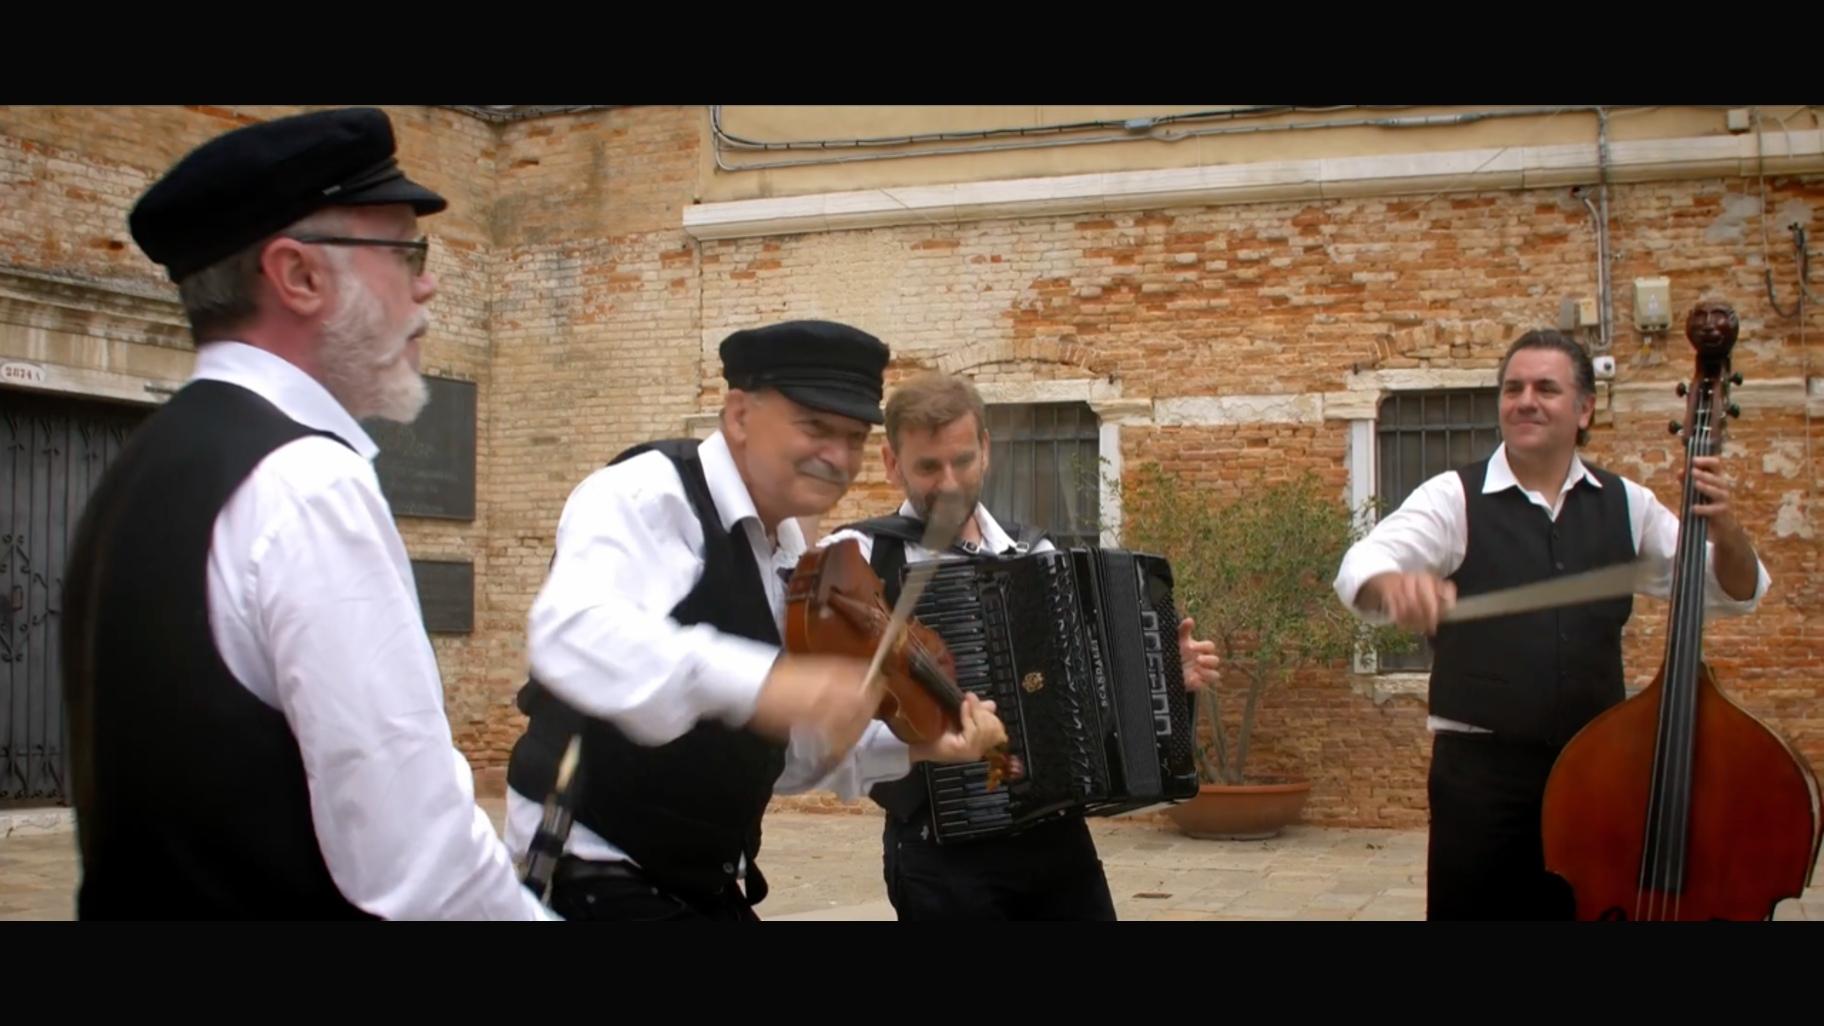 Hershey Felder's latest musical film is Musical Tales of the Venetian Jewish Ghetto.  (Courtesy of Hershey Fields)